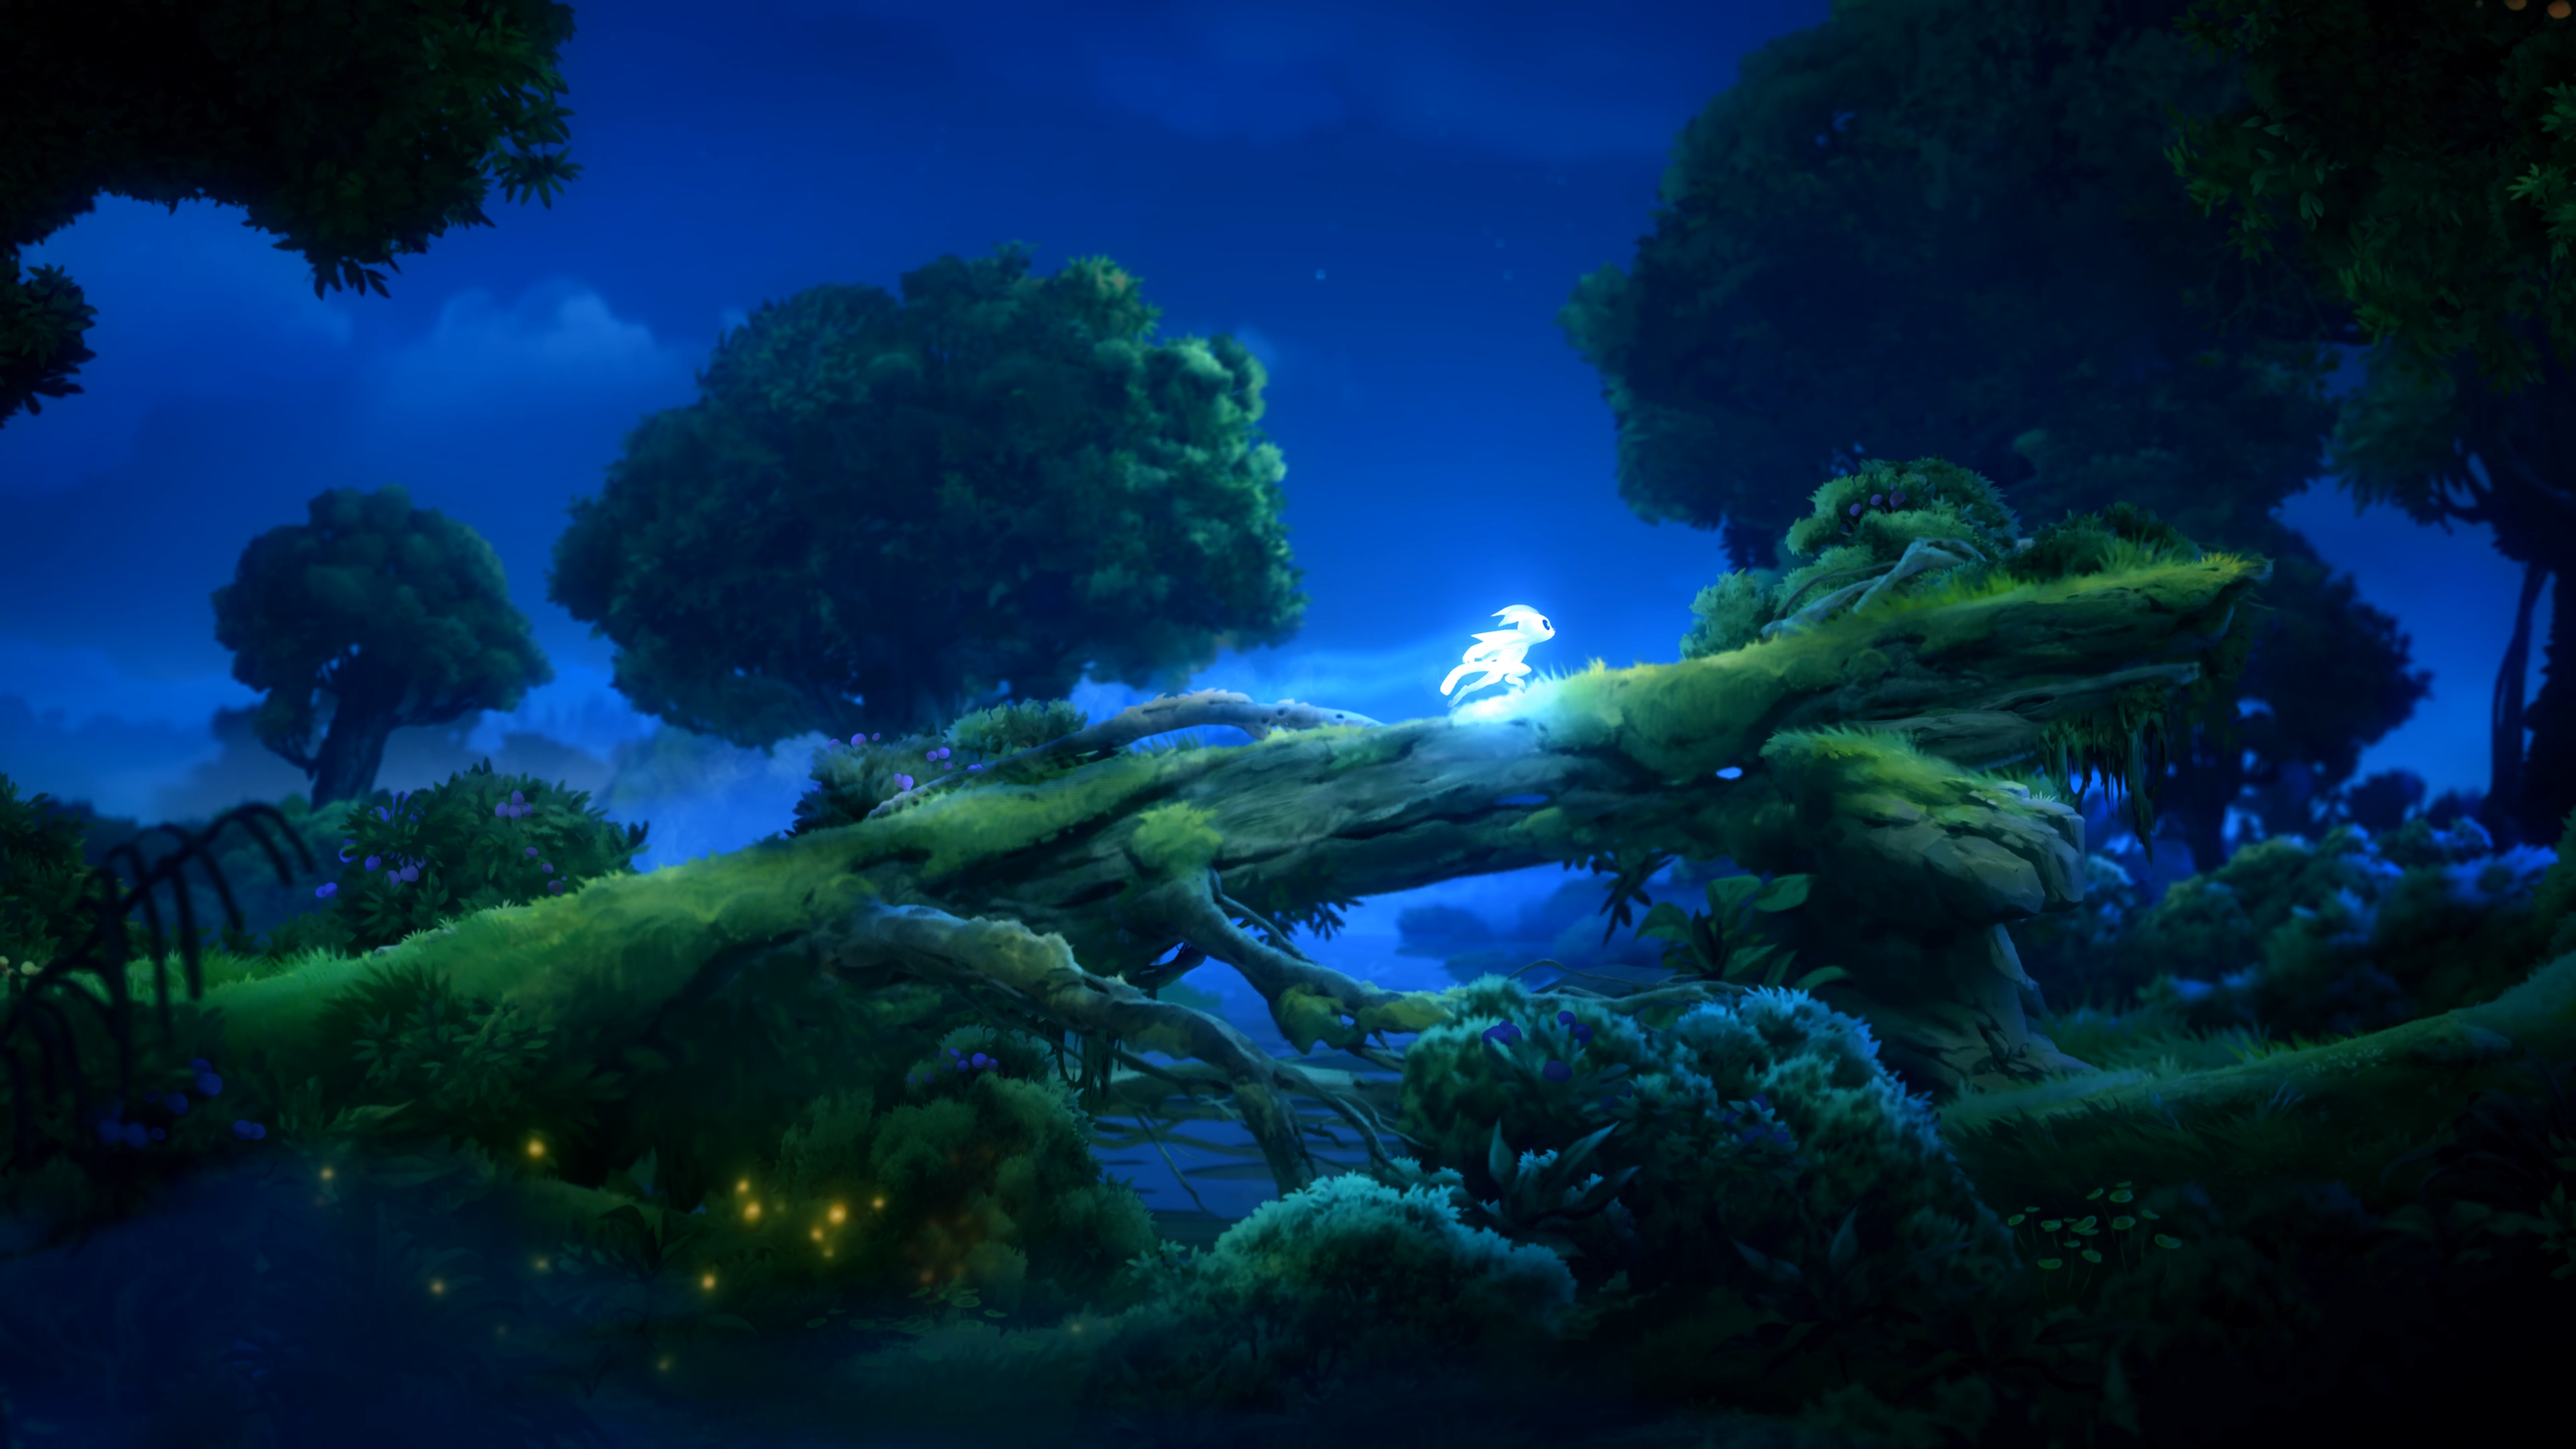 Avance de Ori and the Will of the Wisps para Xbox One y PC